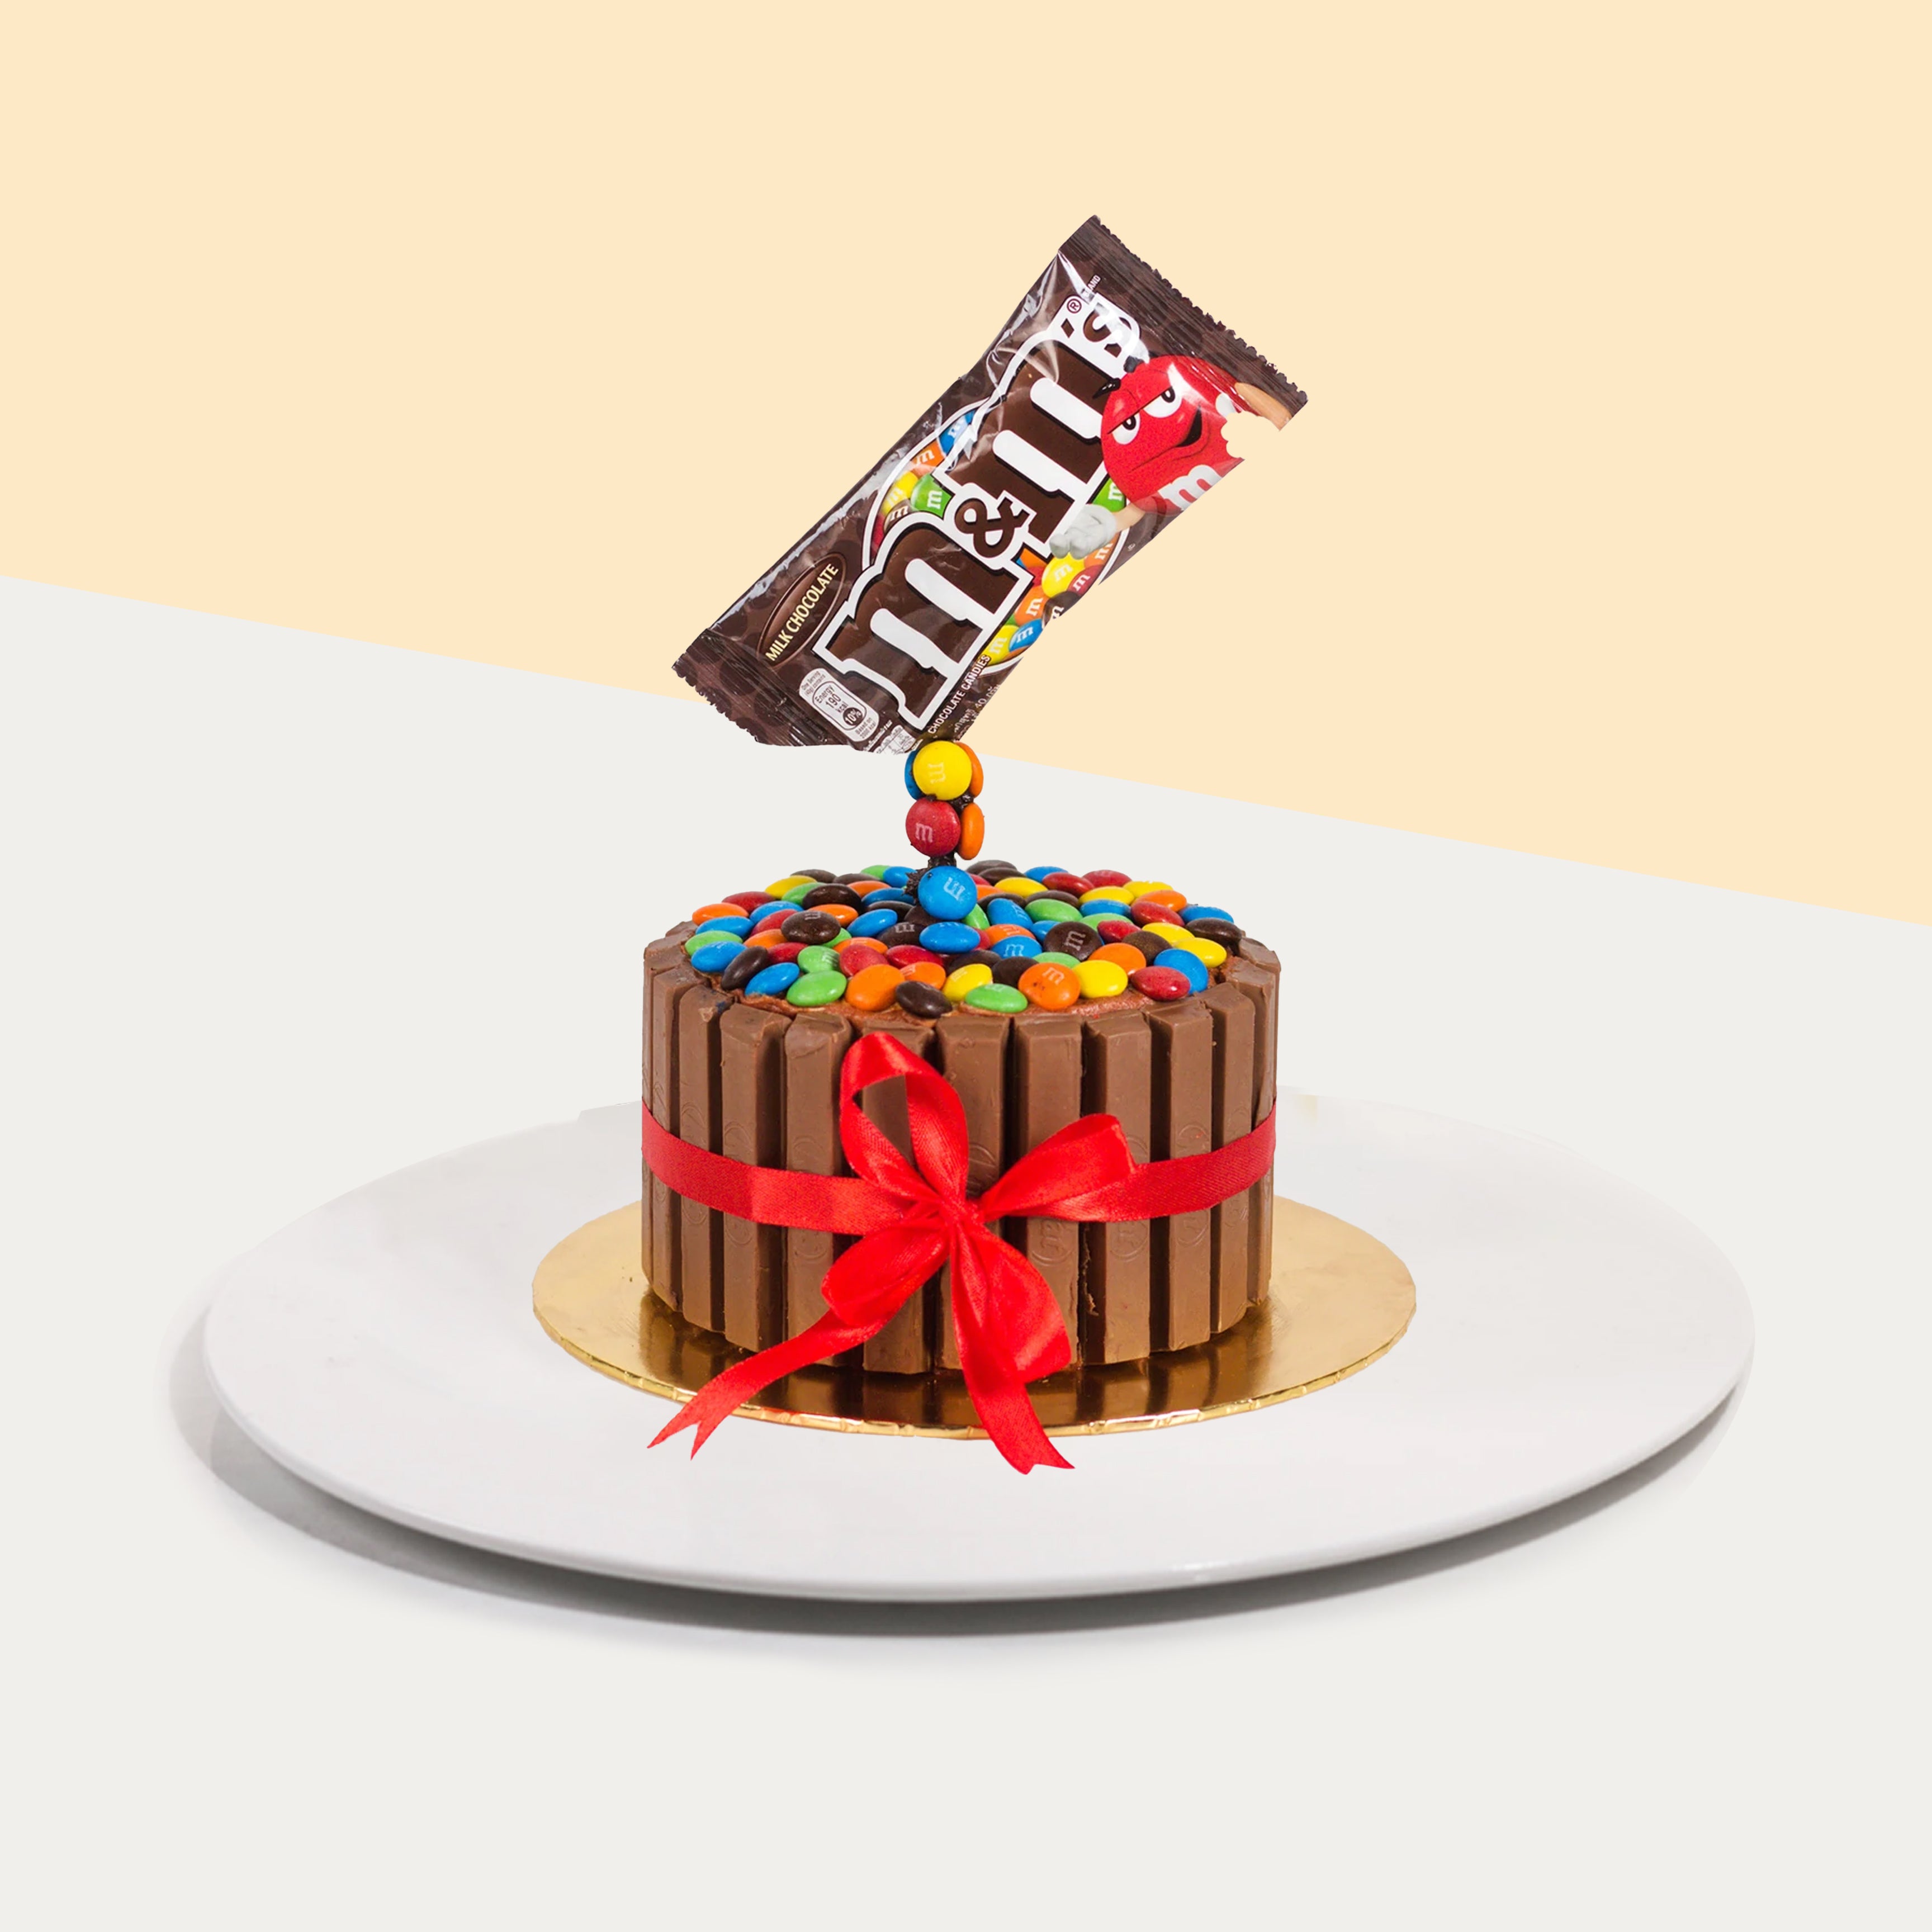 kit kat cake - GiftWrappers